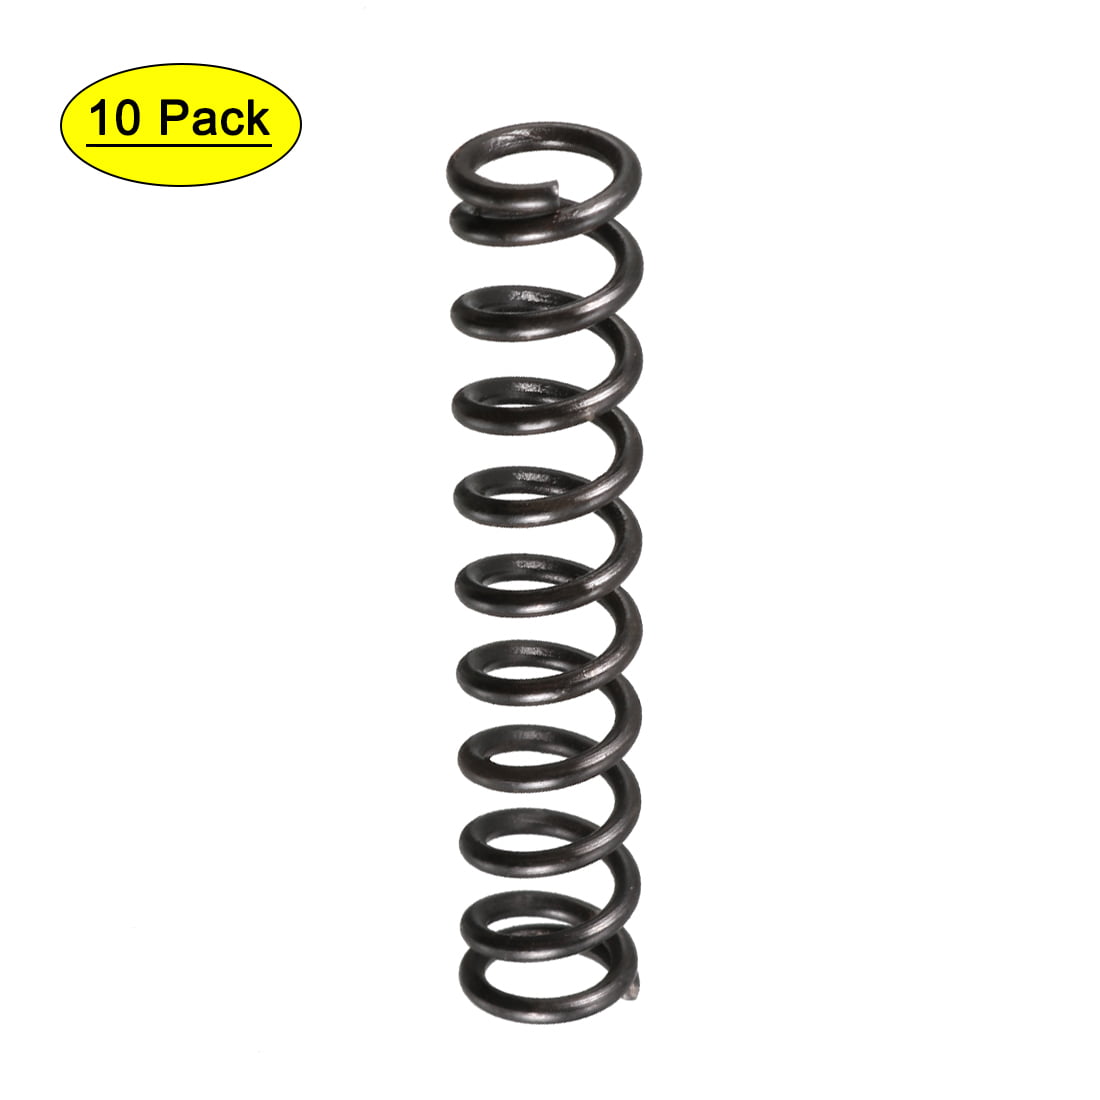 Compression spring 40mm long x 8mm diameter Pack of 4. 